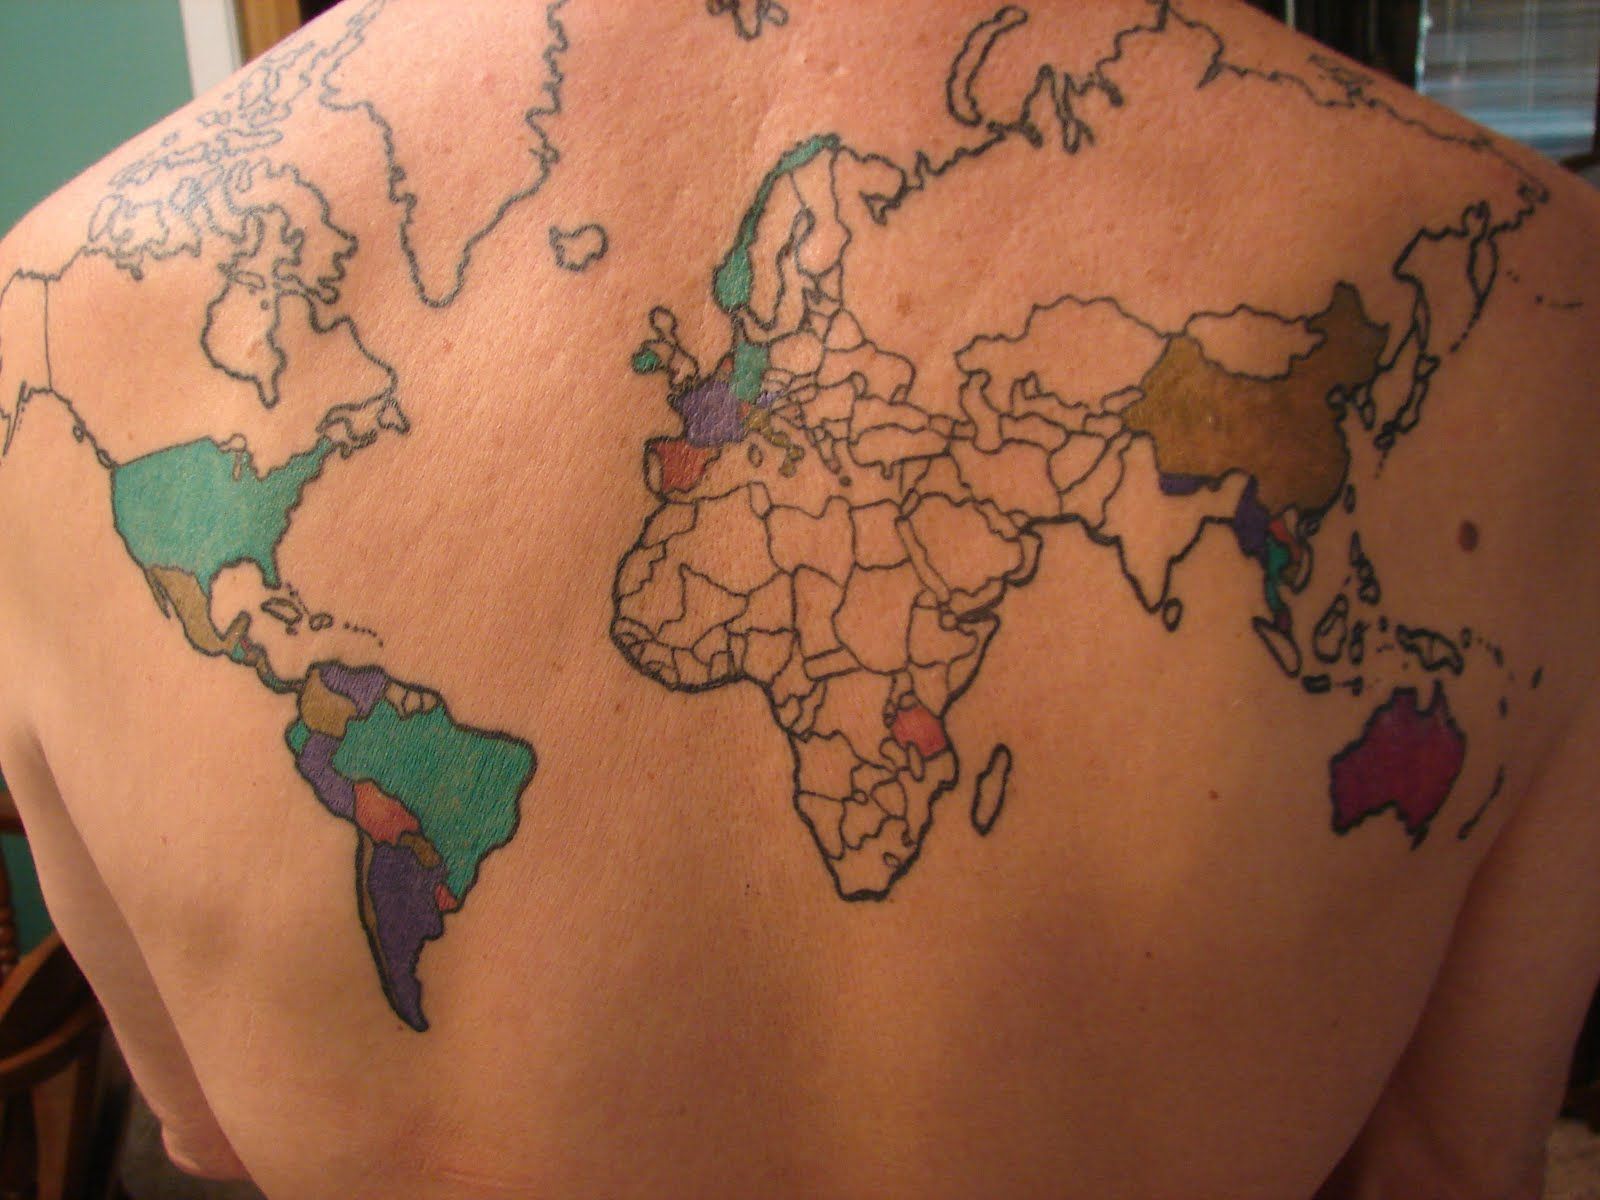 Every new country she goes to, she gets colored in. Very cool.